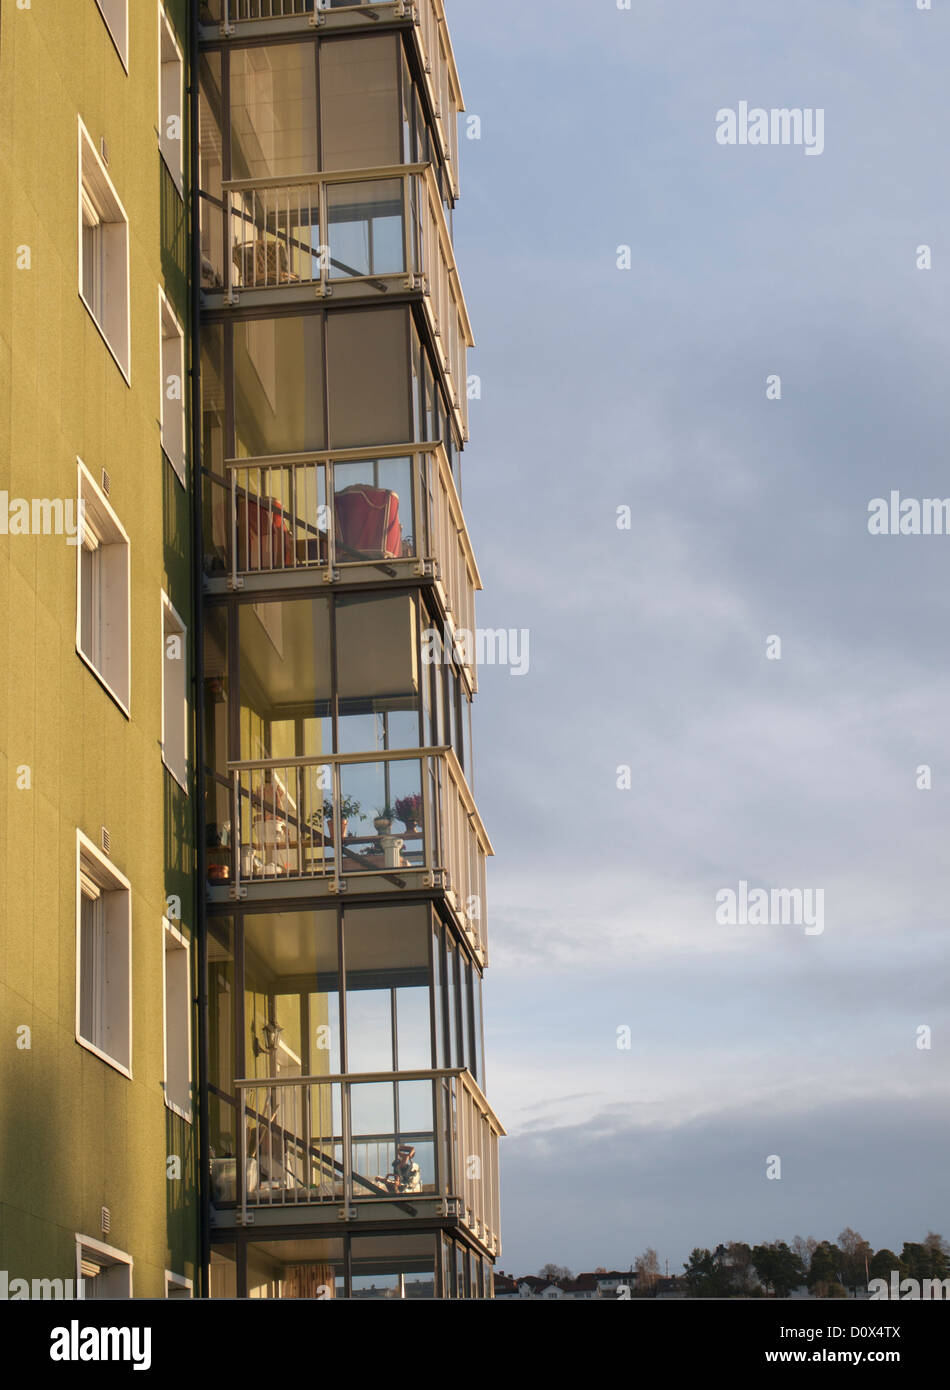 Glass balconies on olive coloured house, Oslo Norway Stock Photo